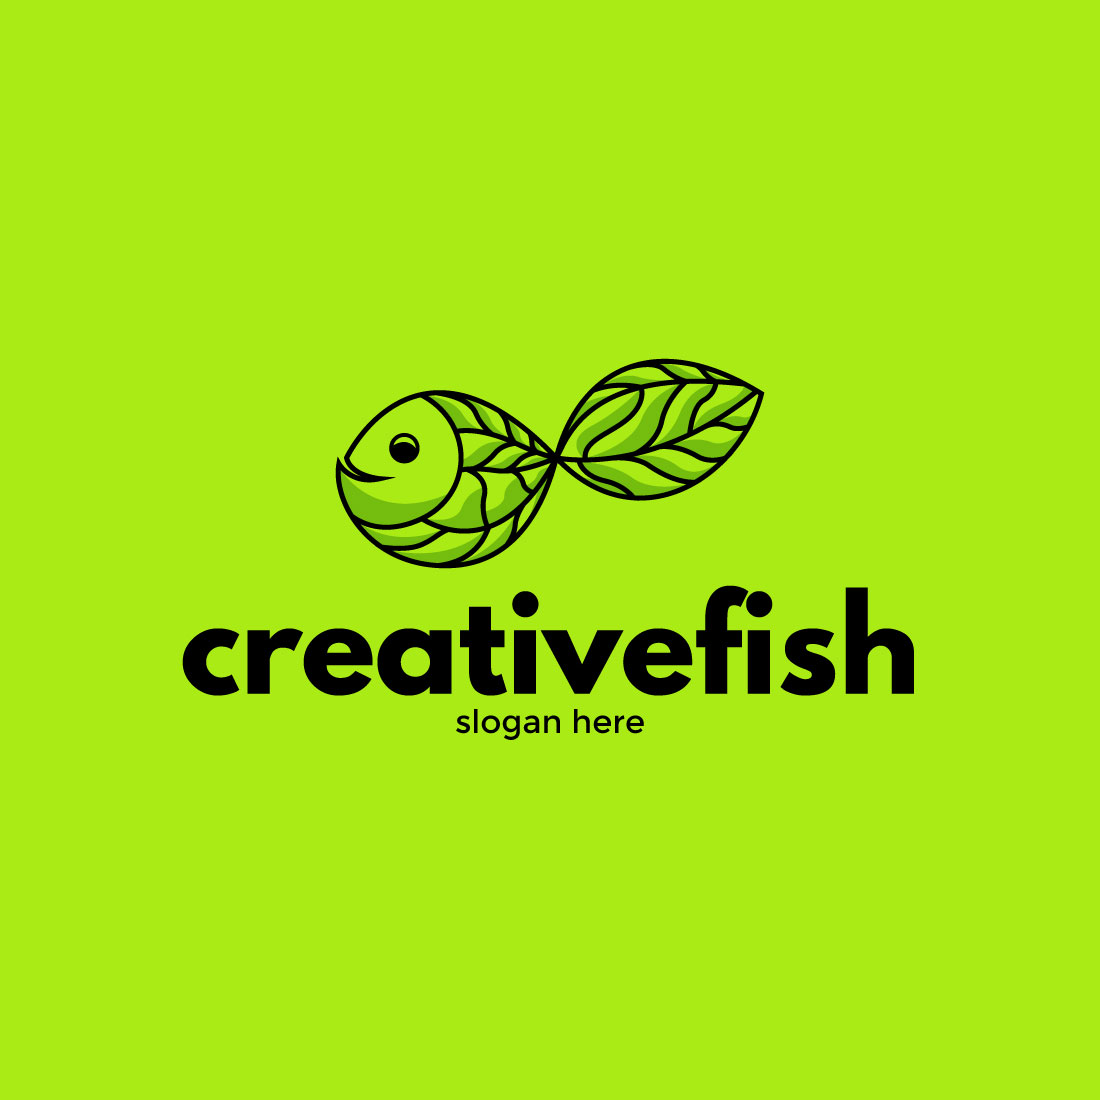 Green logo with a fish on it.